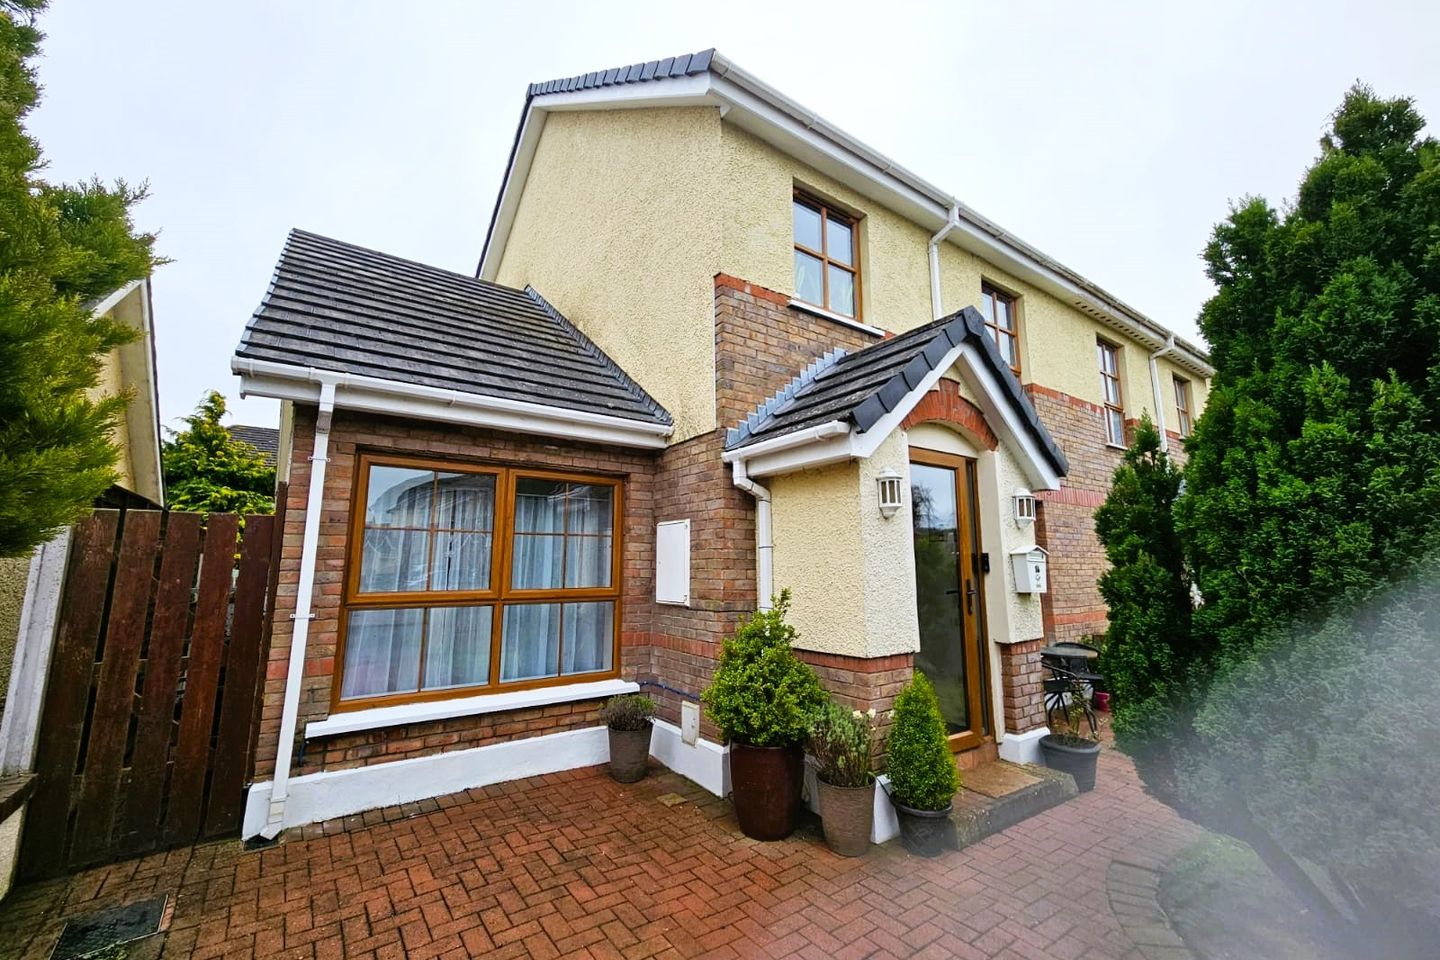 16 Clonmore, Hale Street, Ardee, Co. Louth, A92F9F9